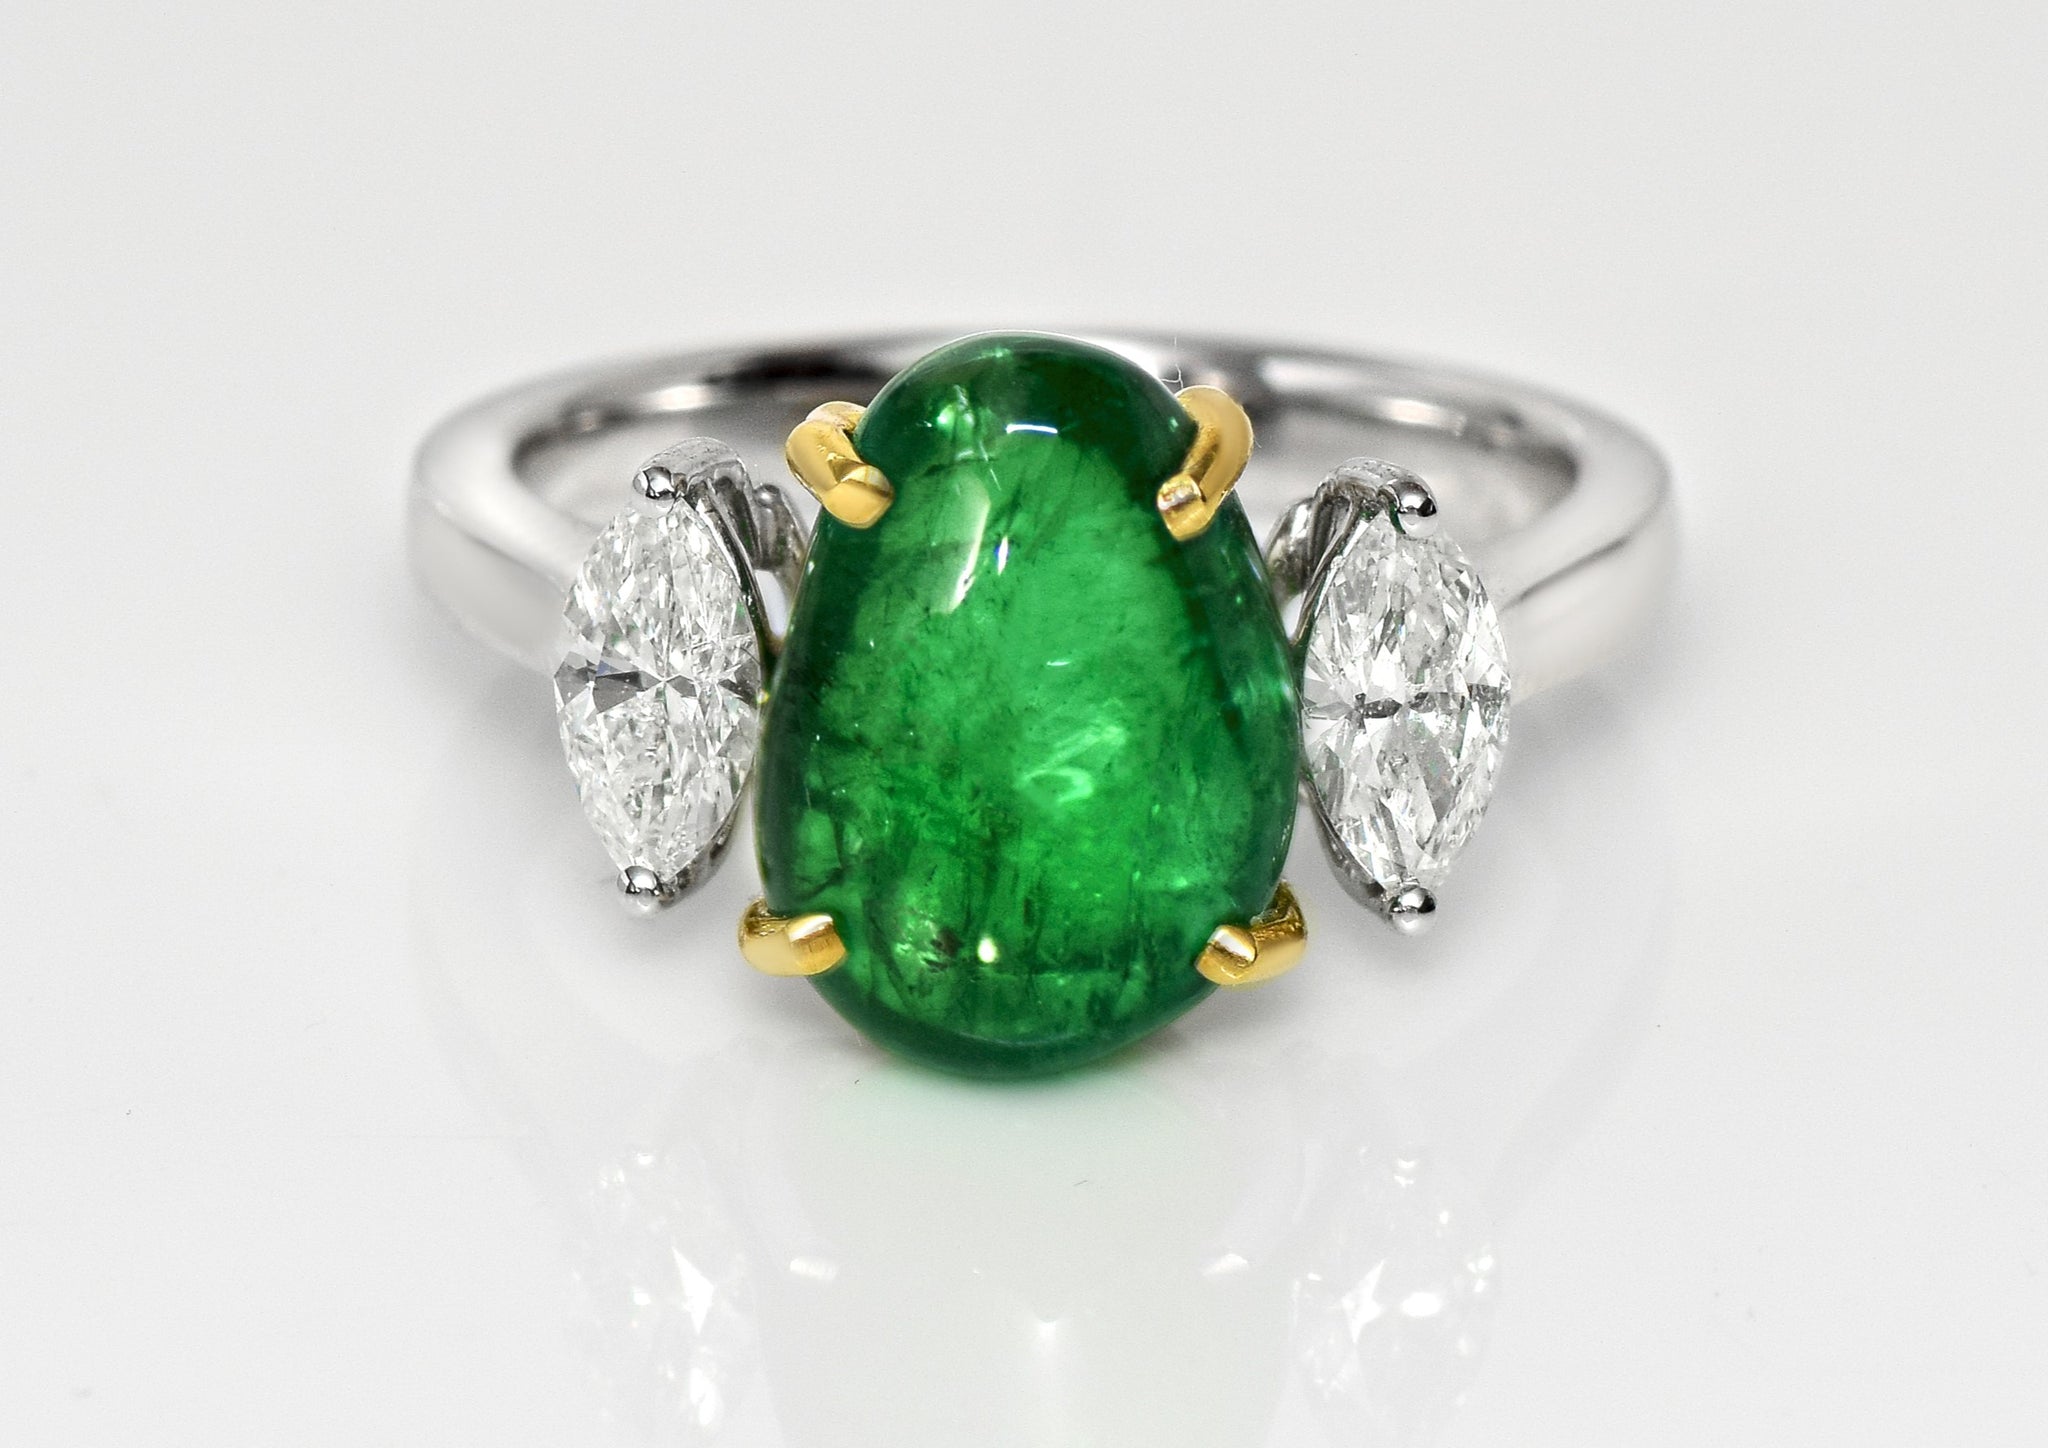 Emerald Cabochon and Fancy Shape Diamond Ring, Embrace the unique beauty of emerald cabochons harmonized with the dazzling sparkle of fancy shape diamonds. (PGDPJ)